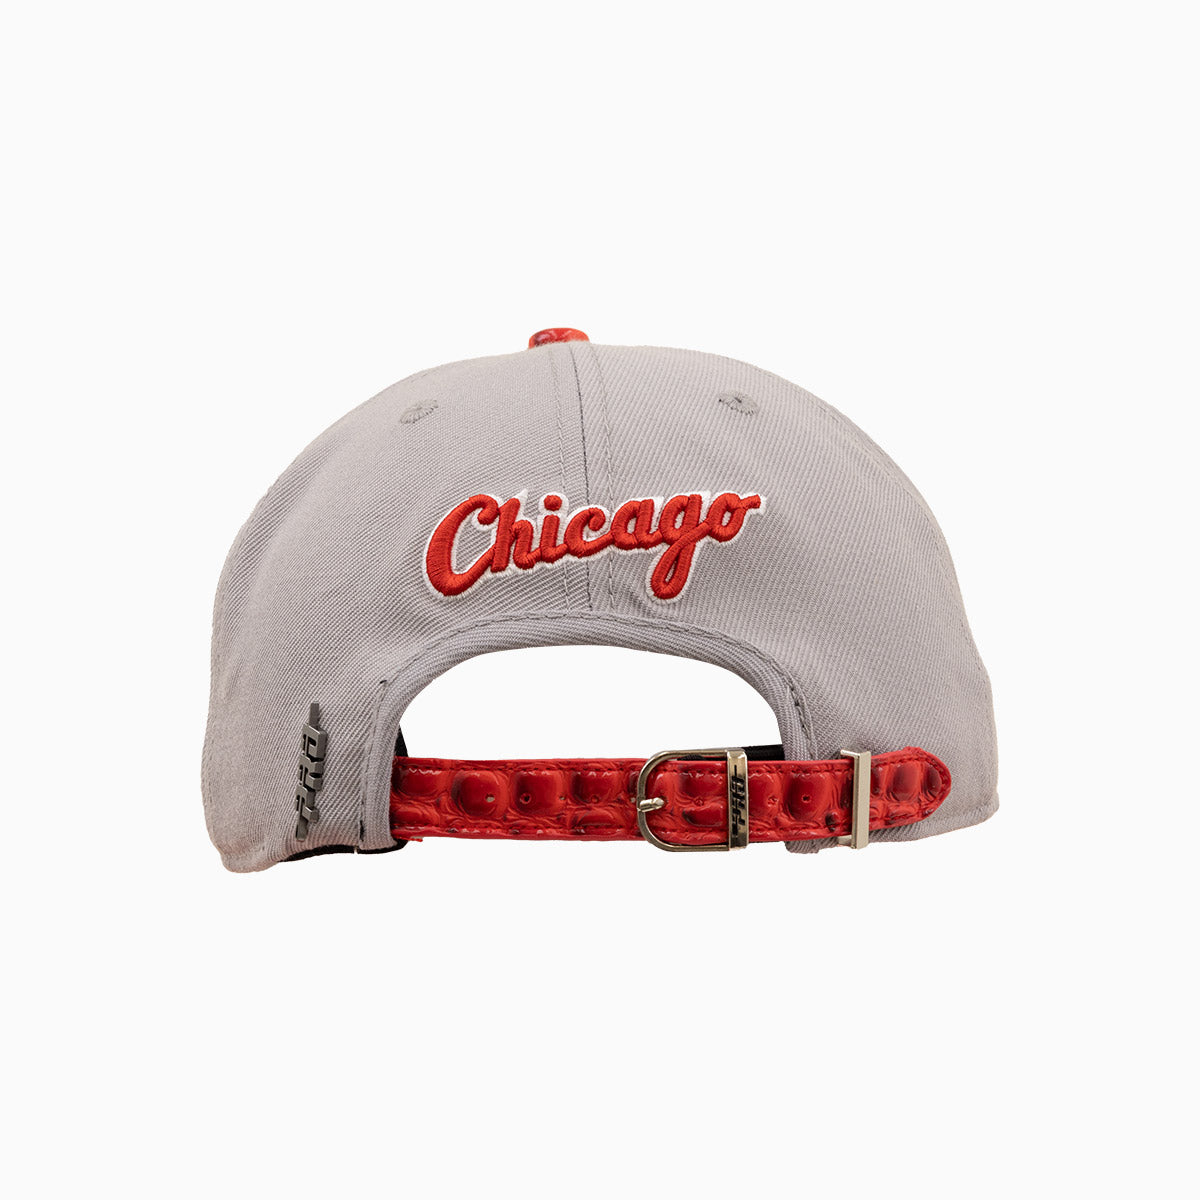 pro-standard-chicago-white-sox-mlb-leather-visor-flat-hat-lcw736178-gry